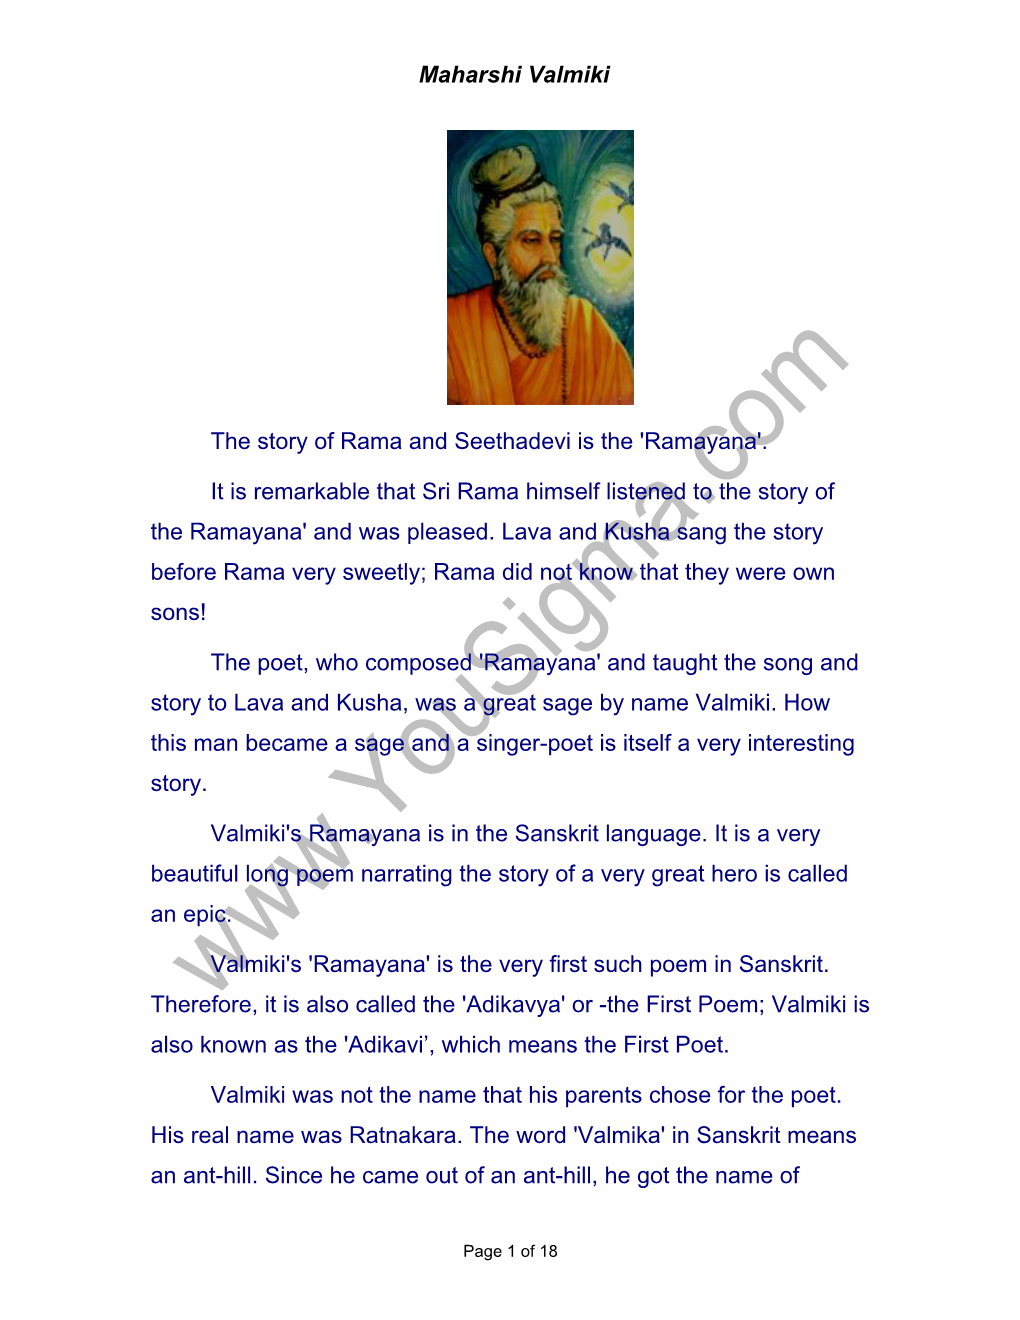 Maharshi Valmiki the Story of Rama and Seethadevi Is the 'Ramayana'. It Is Remarkable That Sri Rama Himself Listened to the Stor